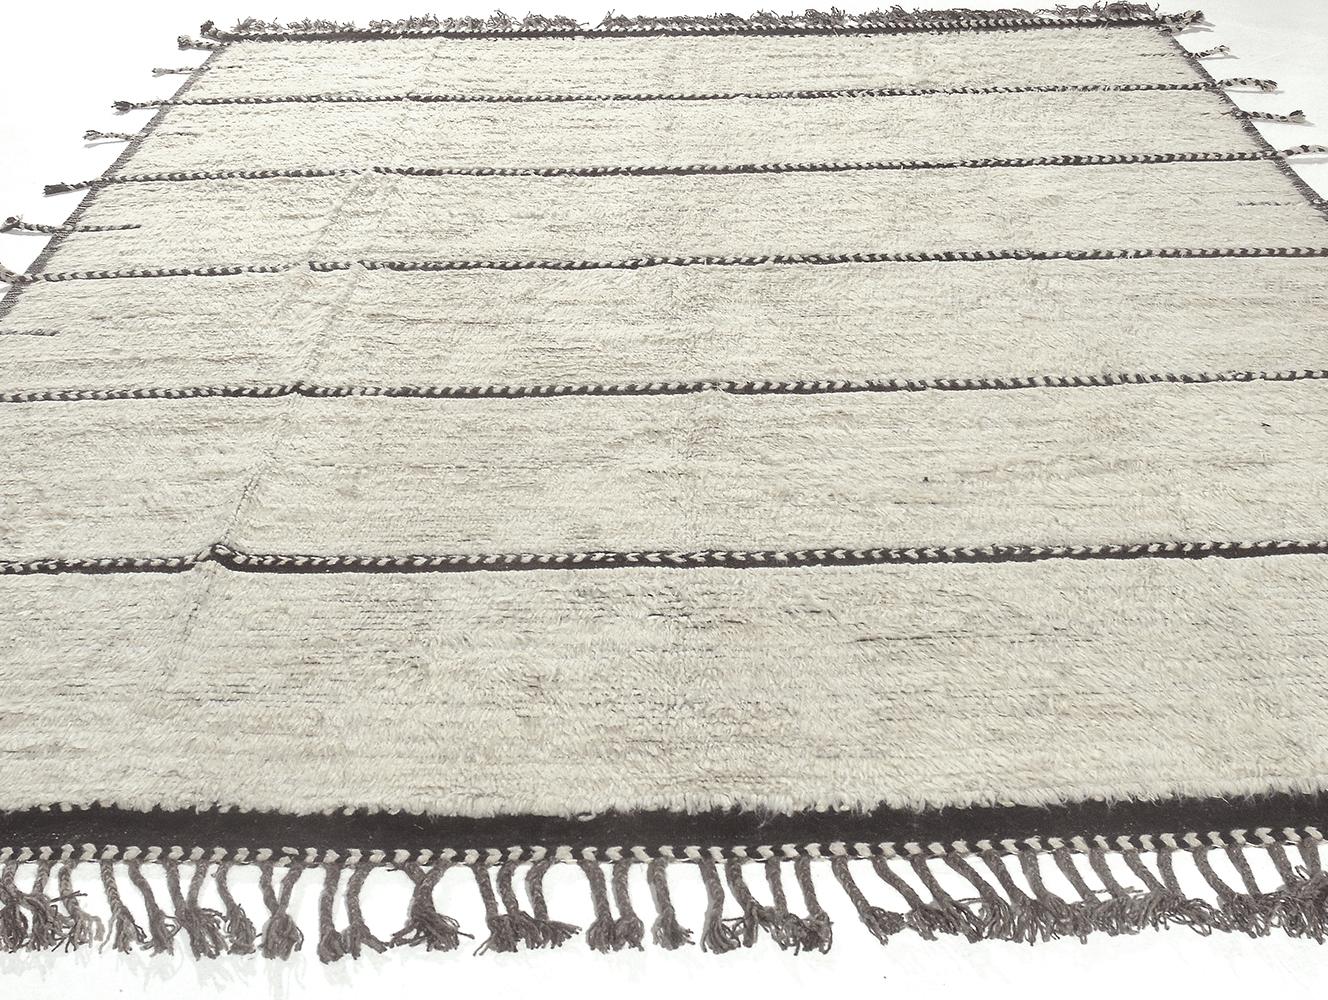 A beautiful and trendy modern Boho Chic rug, rug type / origin: Central Asian rug, date circa modern rug. Size: 9 ft 1 in x 12 ft 1 in (2.77 m x 3.68 m)

Simple and Minimalist describes the harmonious design of this modern carpet. The braided fringe